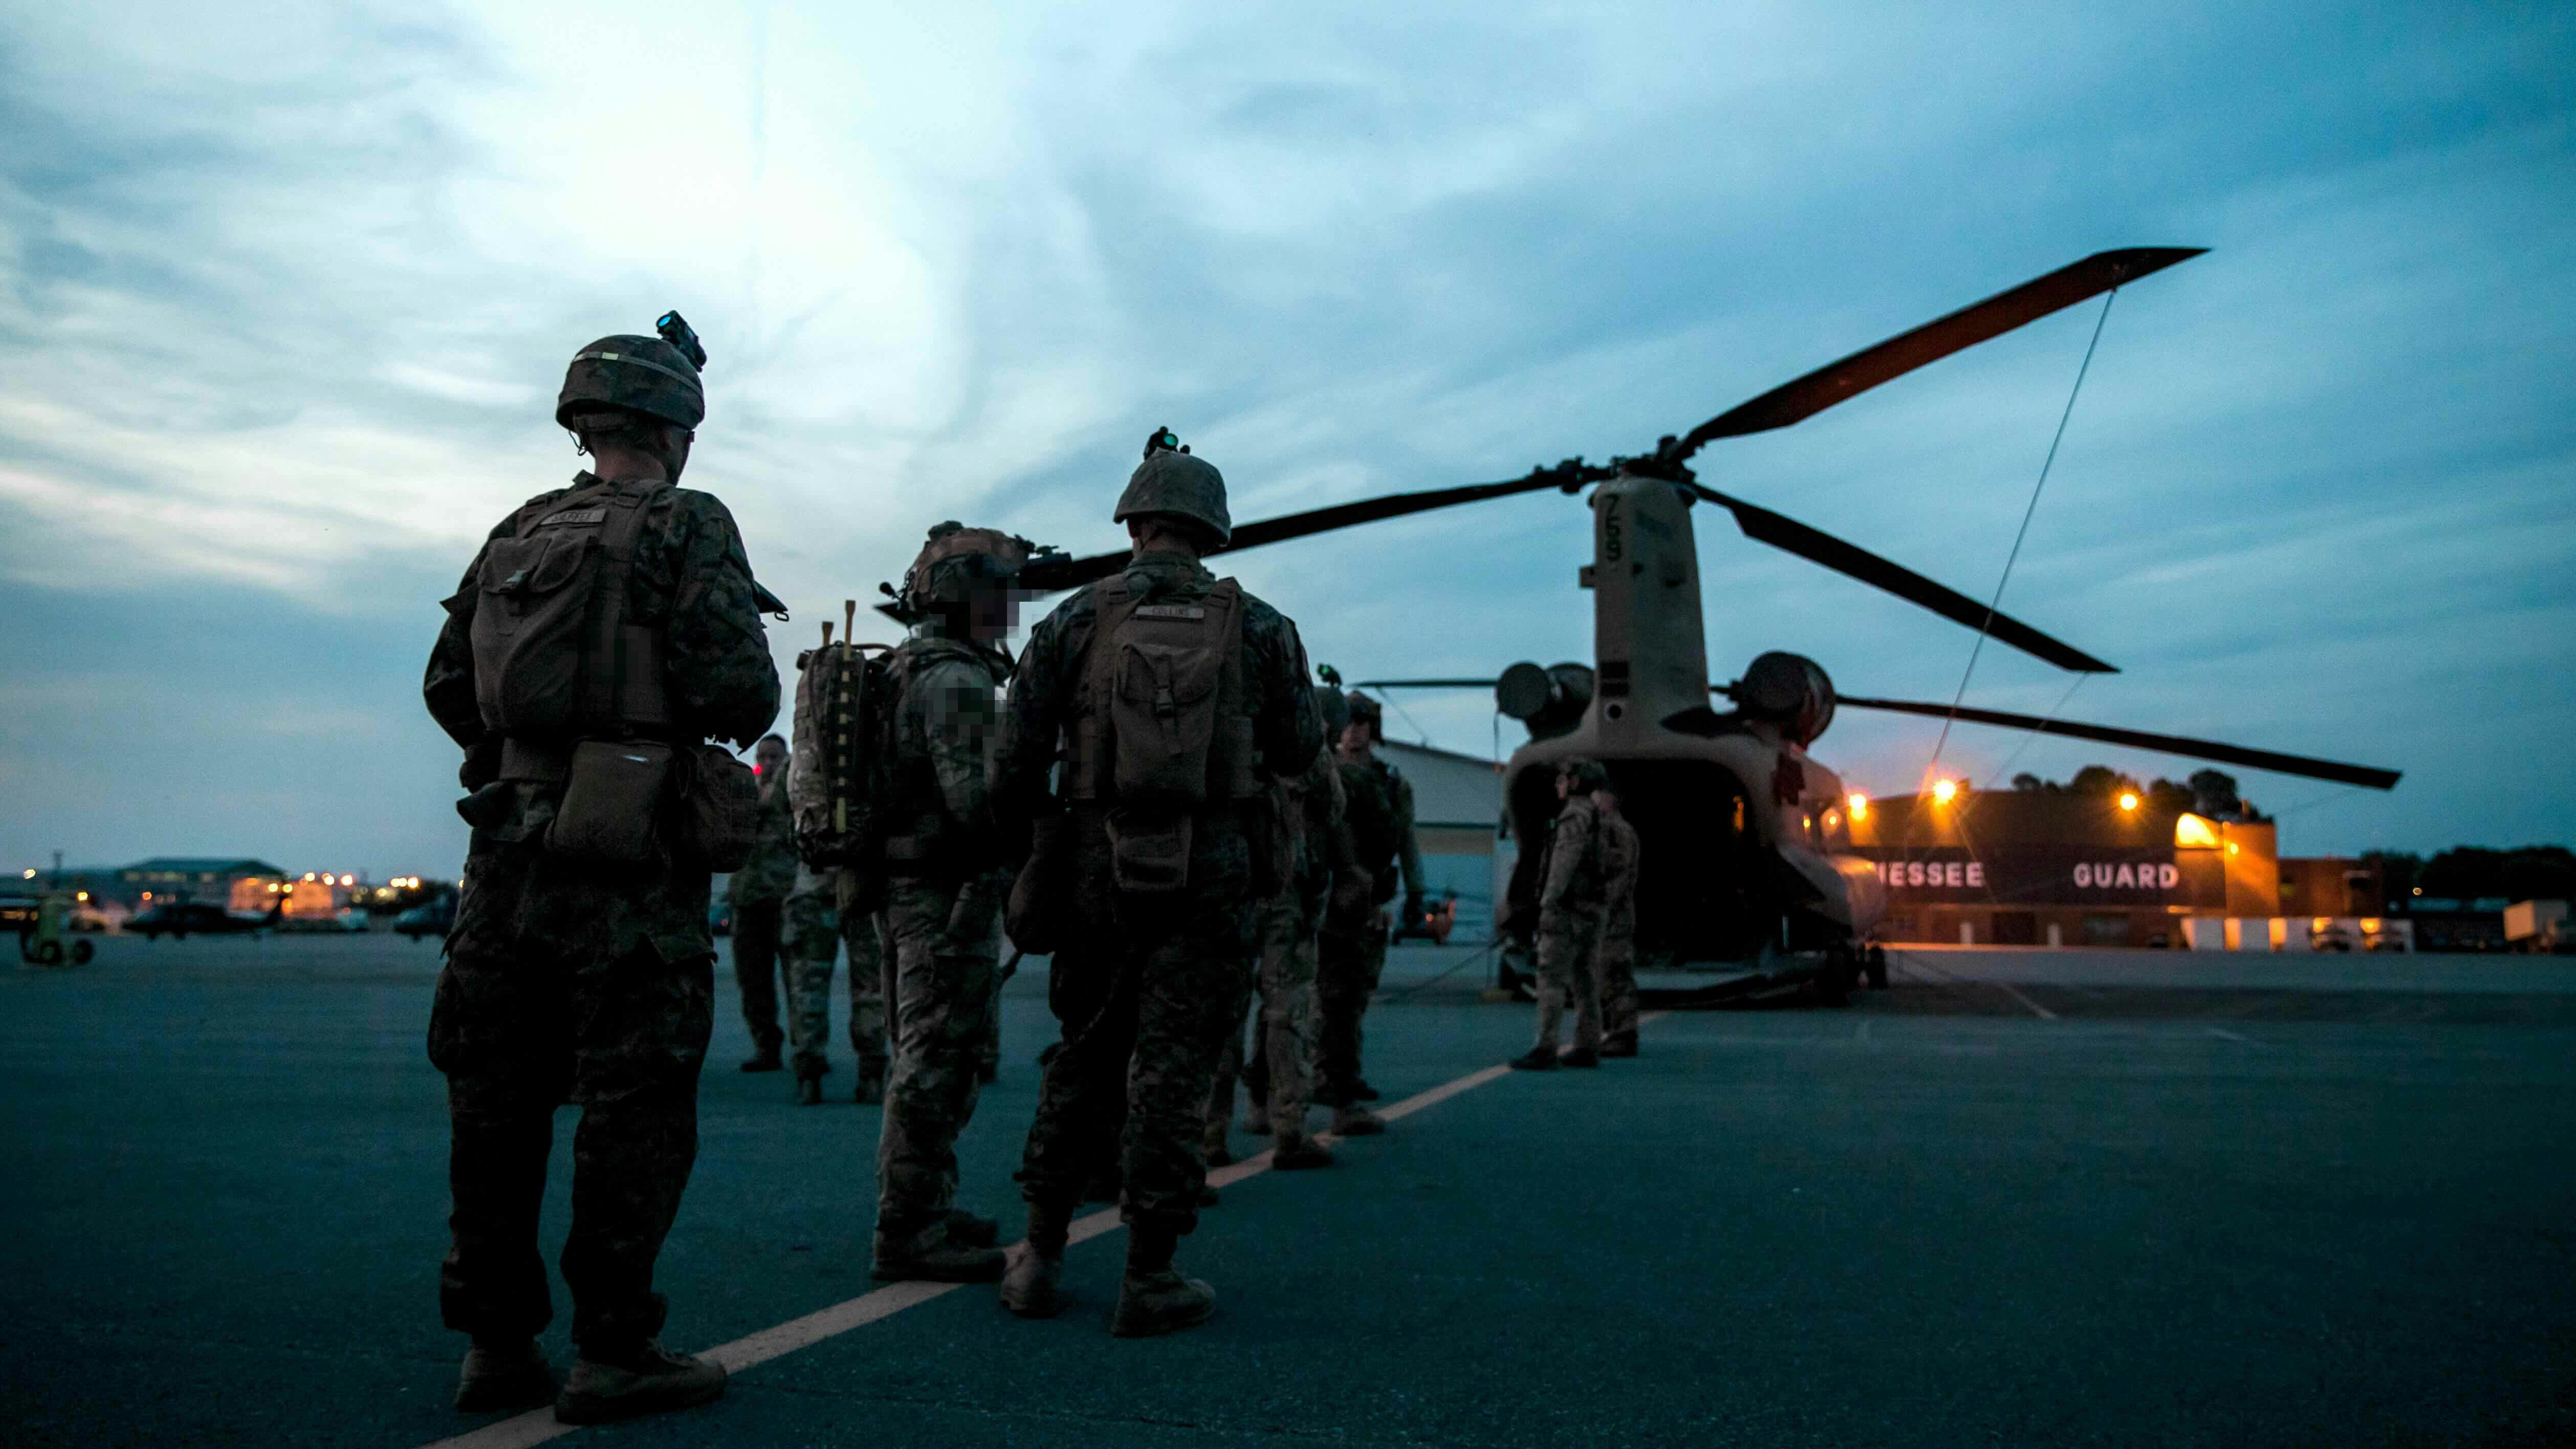 U.S. Marines with 3rd Battalion, 2d Marine Regiment (3/2), 2d Marine Division, and Marine Corps Forces Special Operations Command (MARSOC), board a U.S. Army CH-47 Chinook